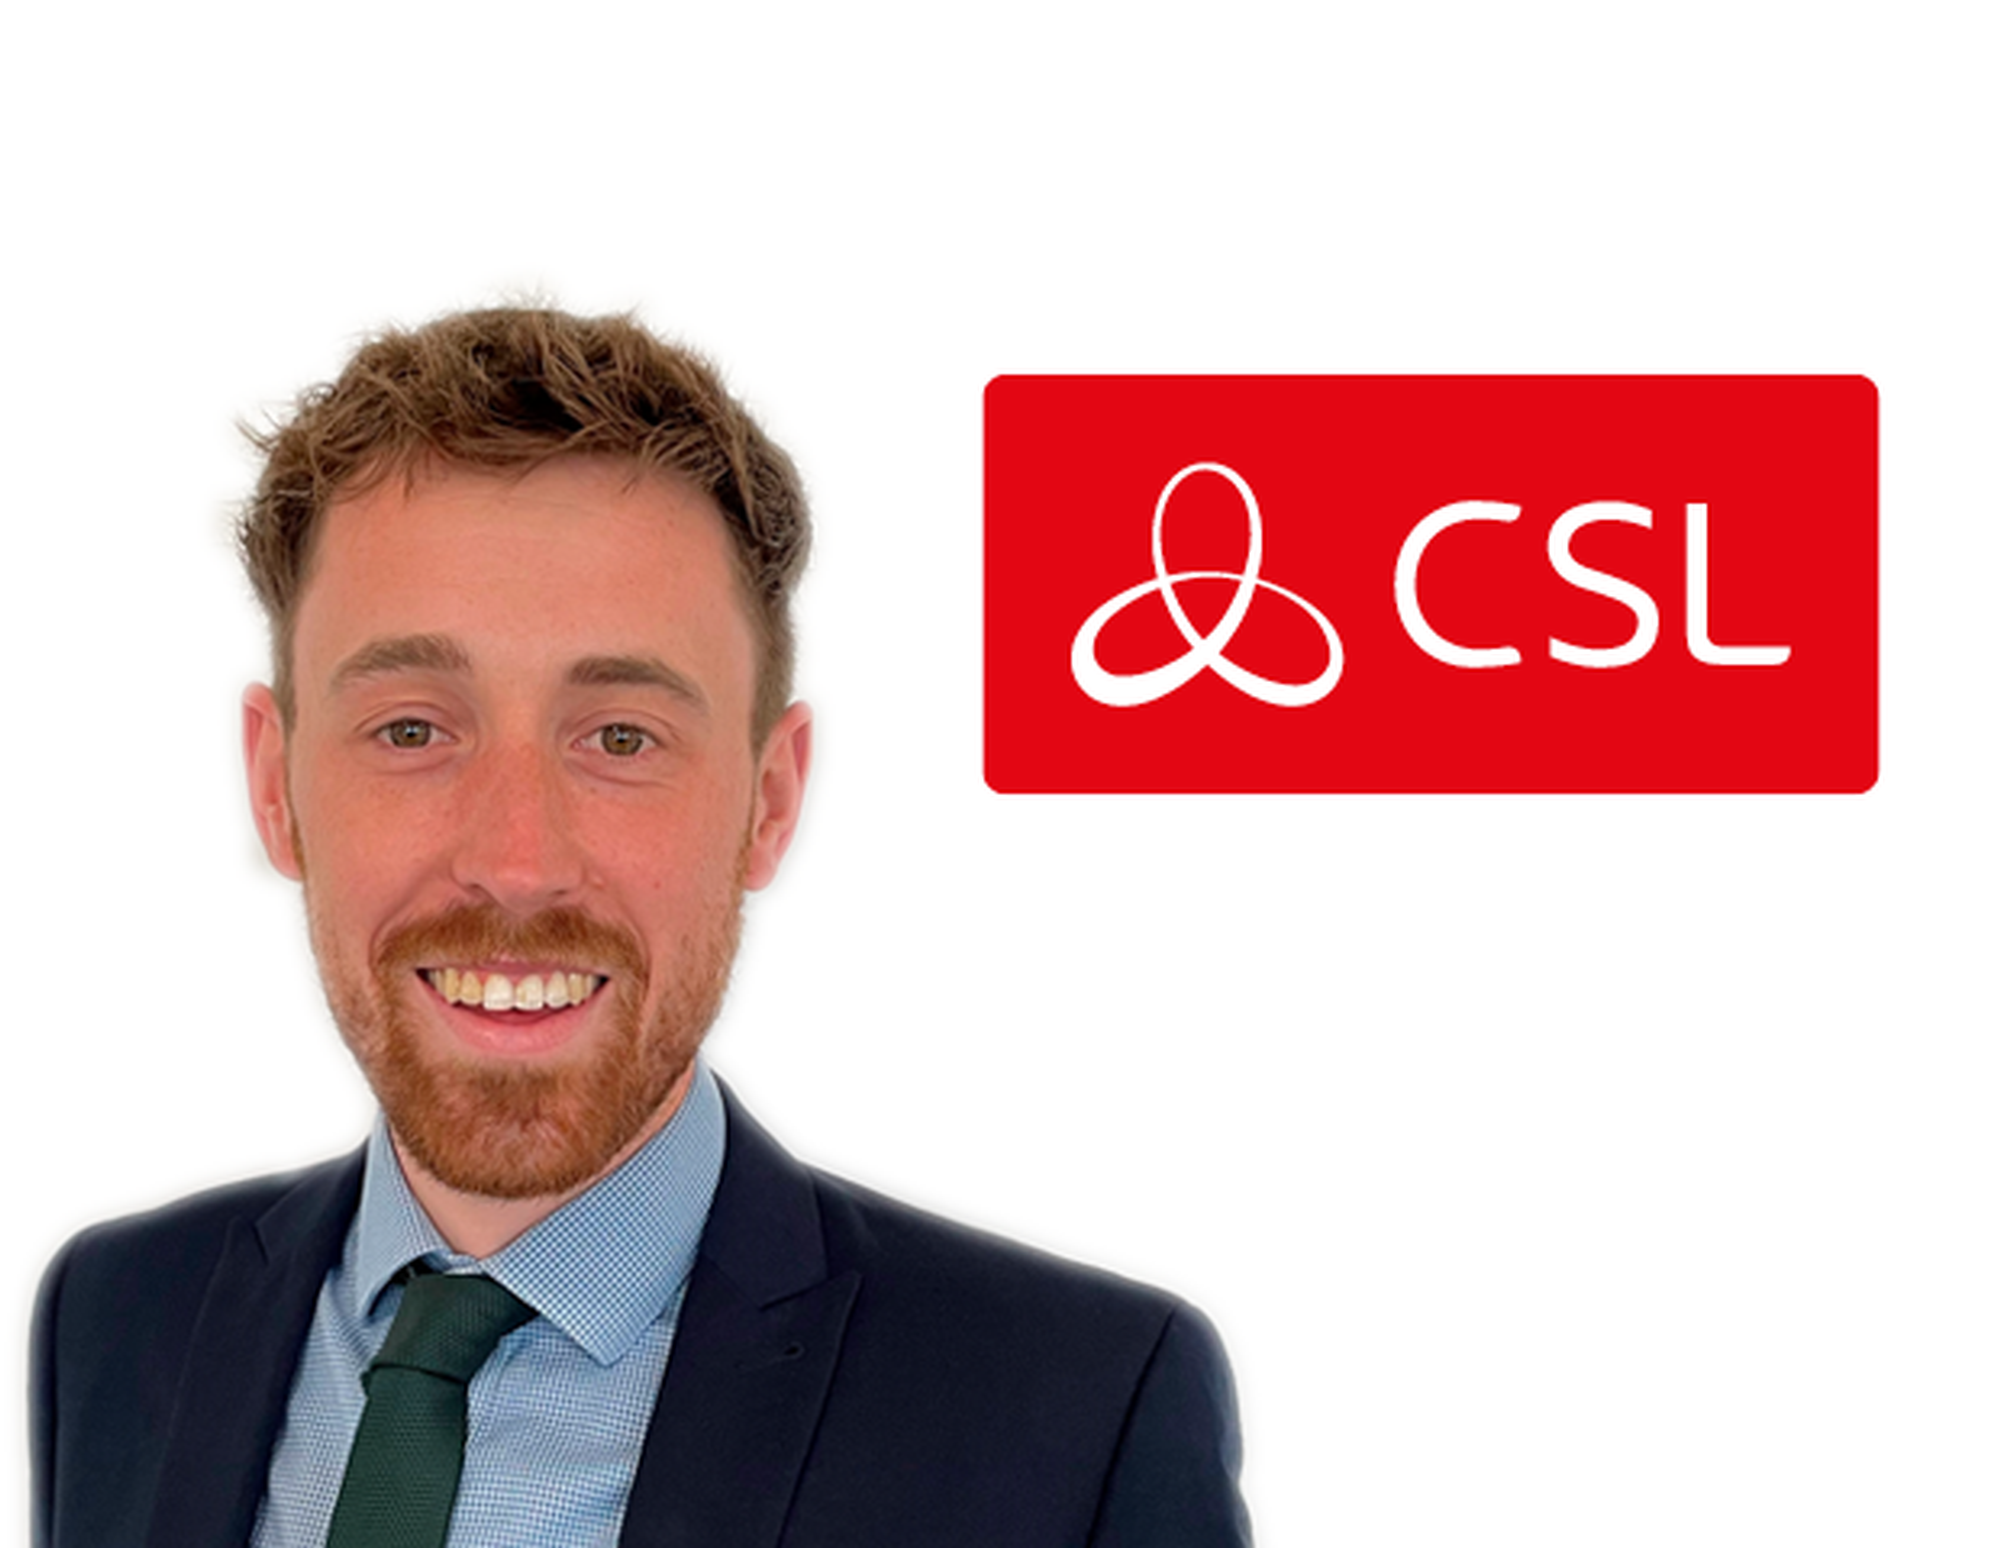 CSL APPOINTS LUKE COLLARD AS NEW REGIONAL SALES MANAGER